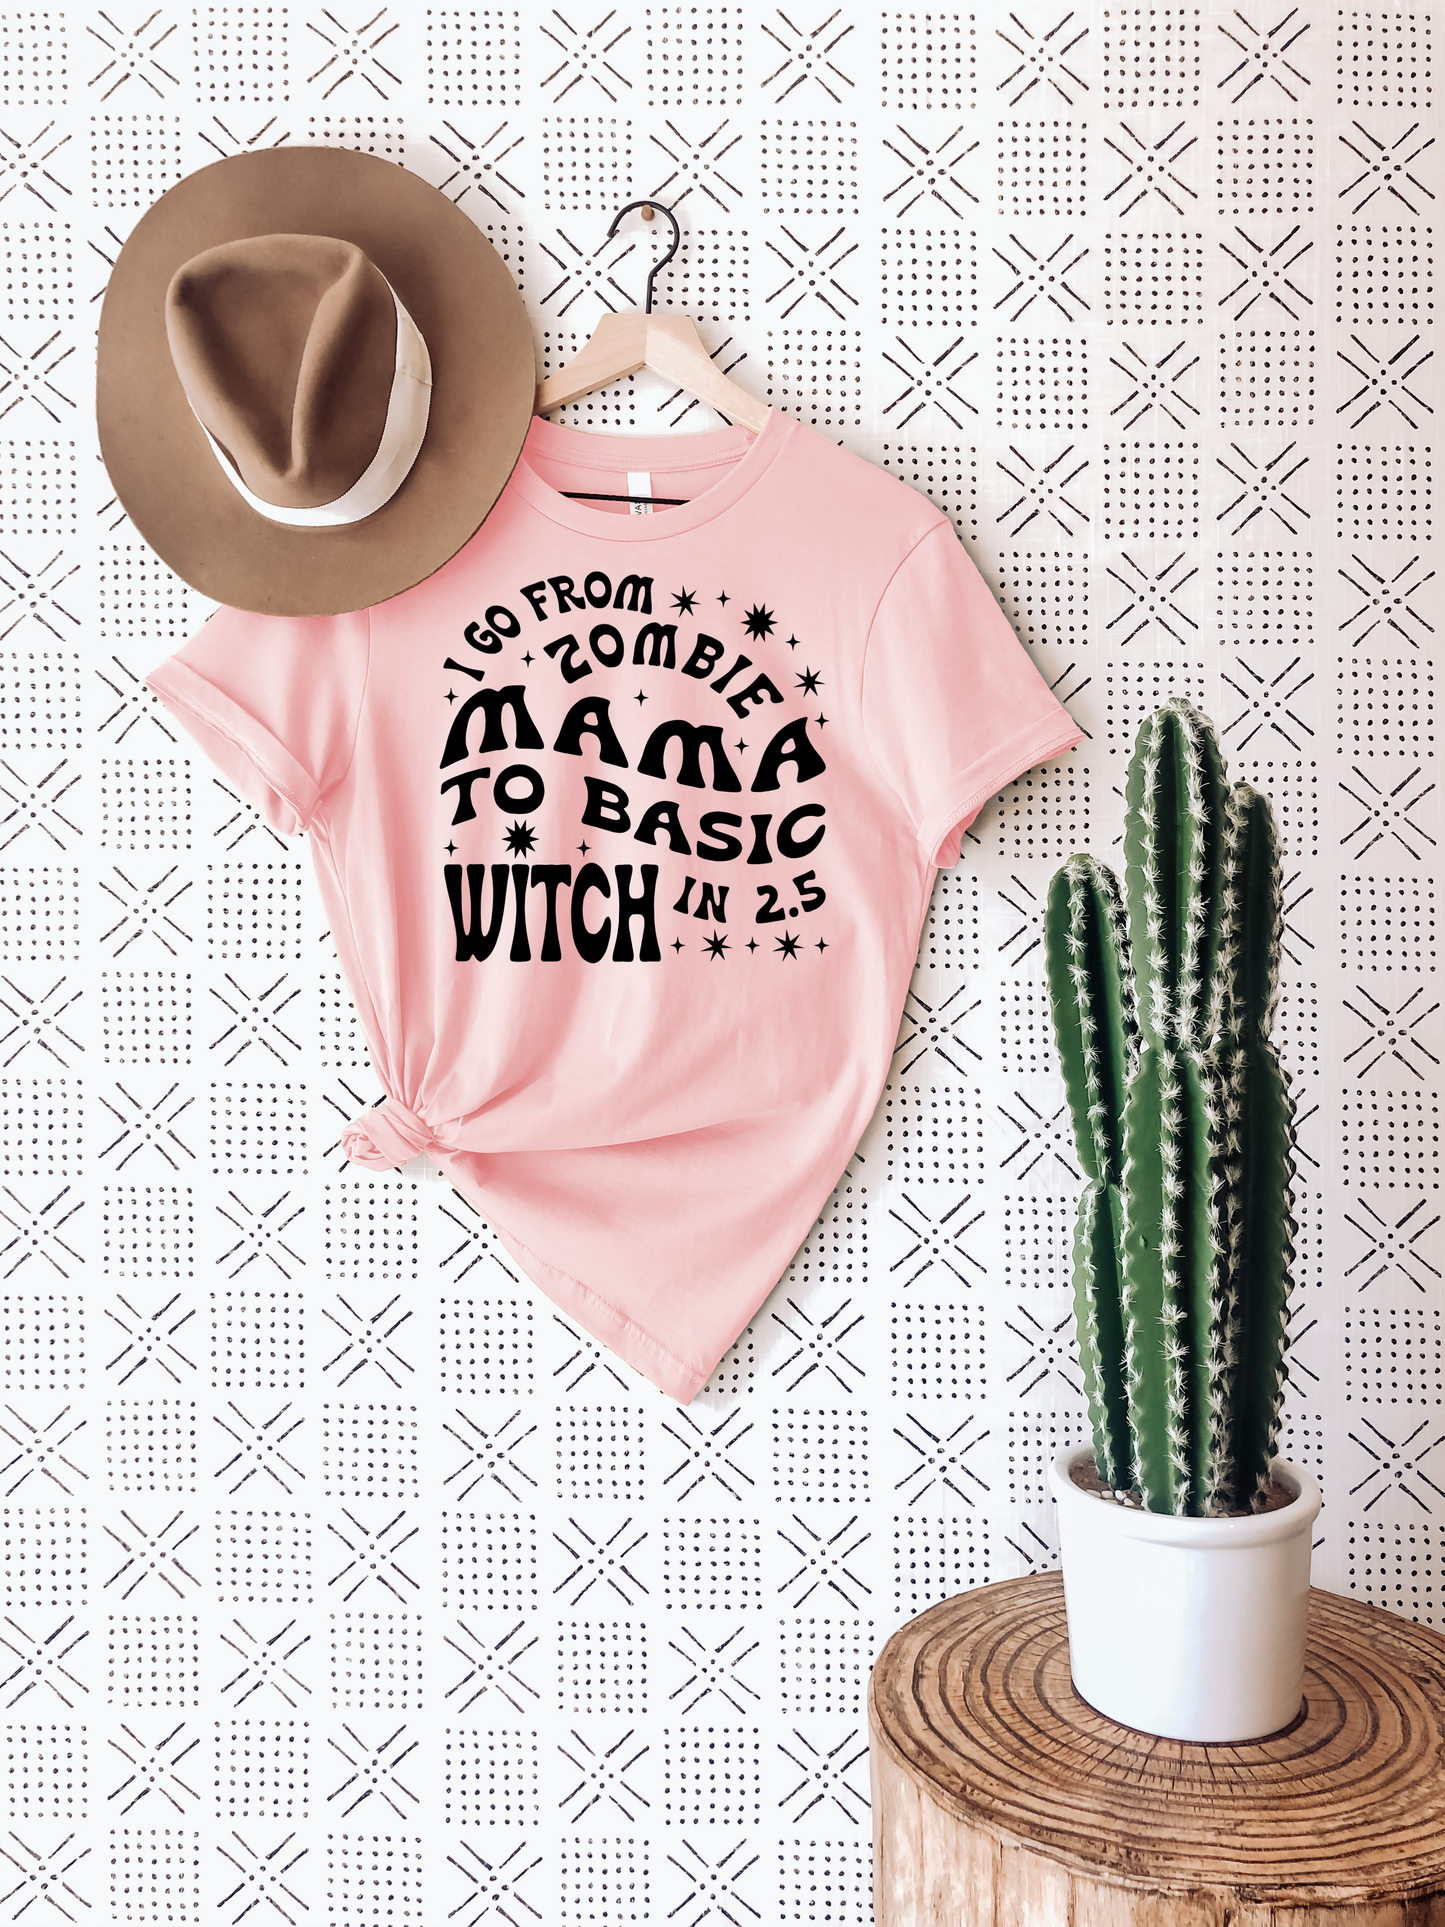 Mama’s a basic witch